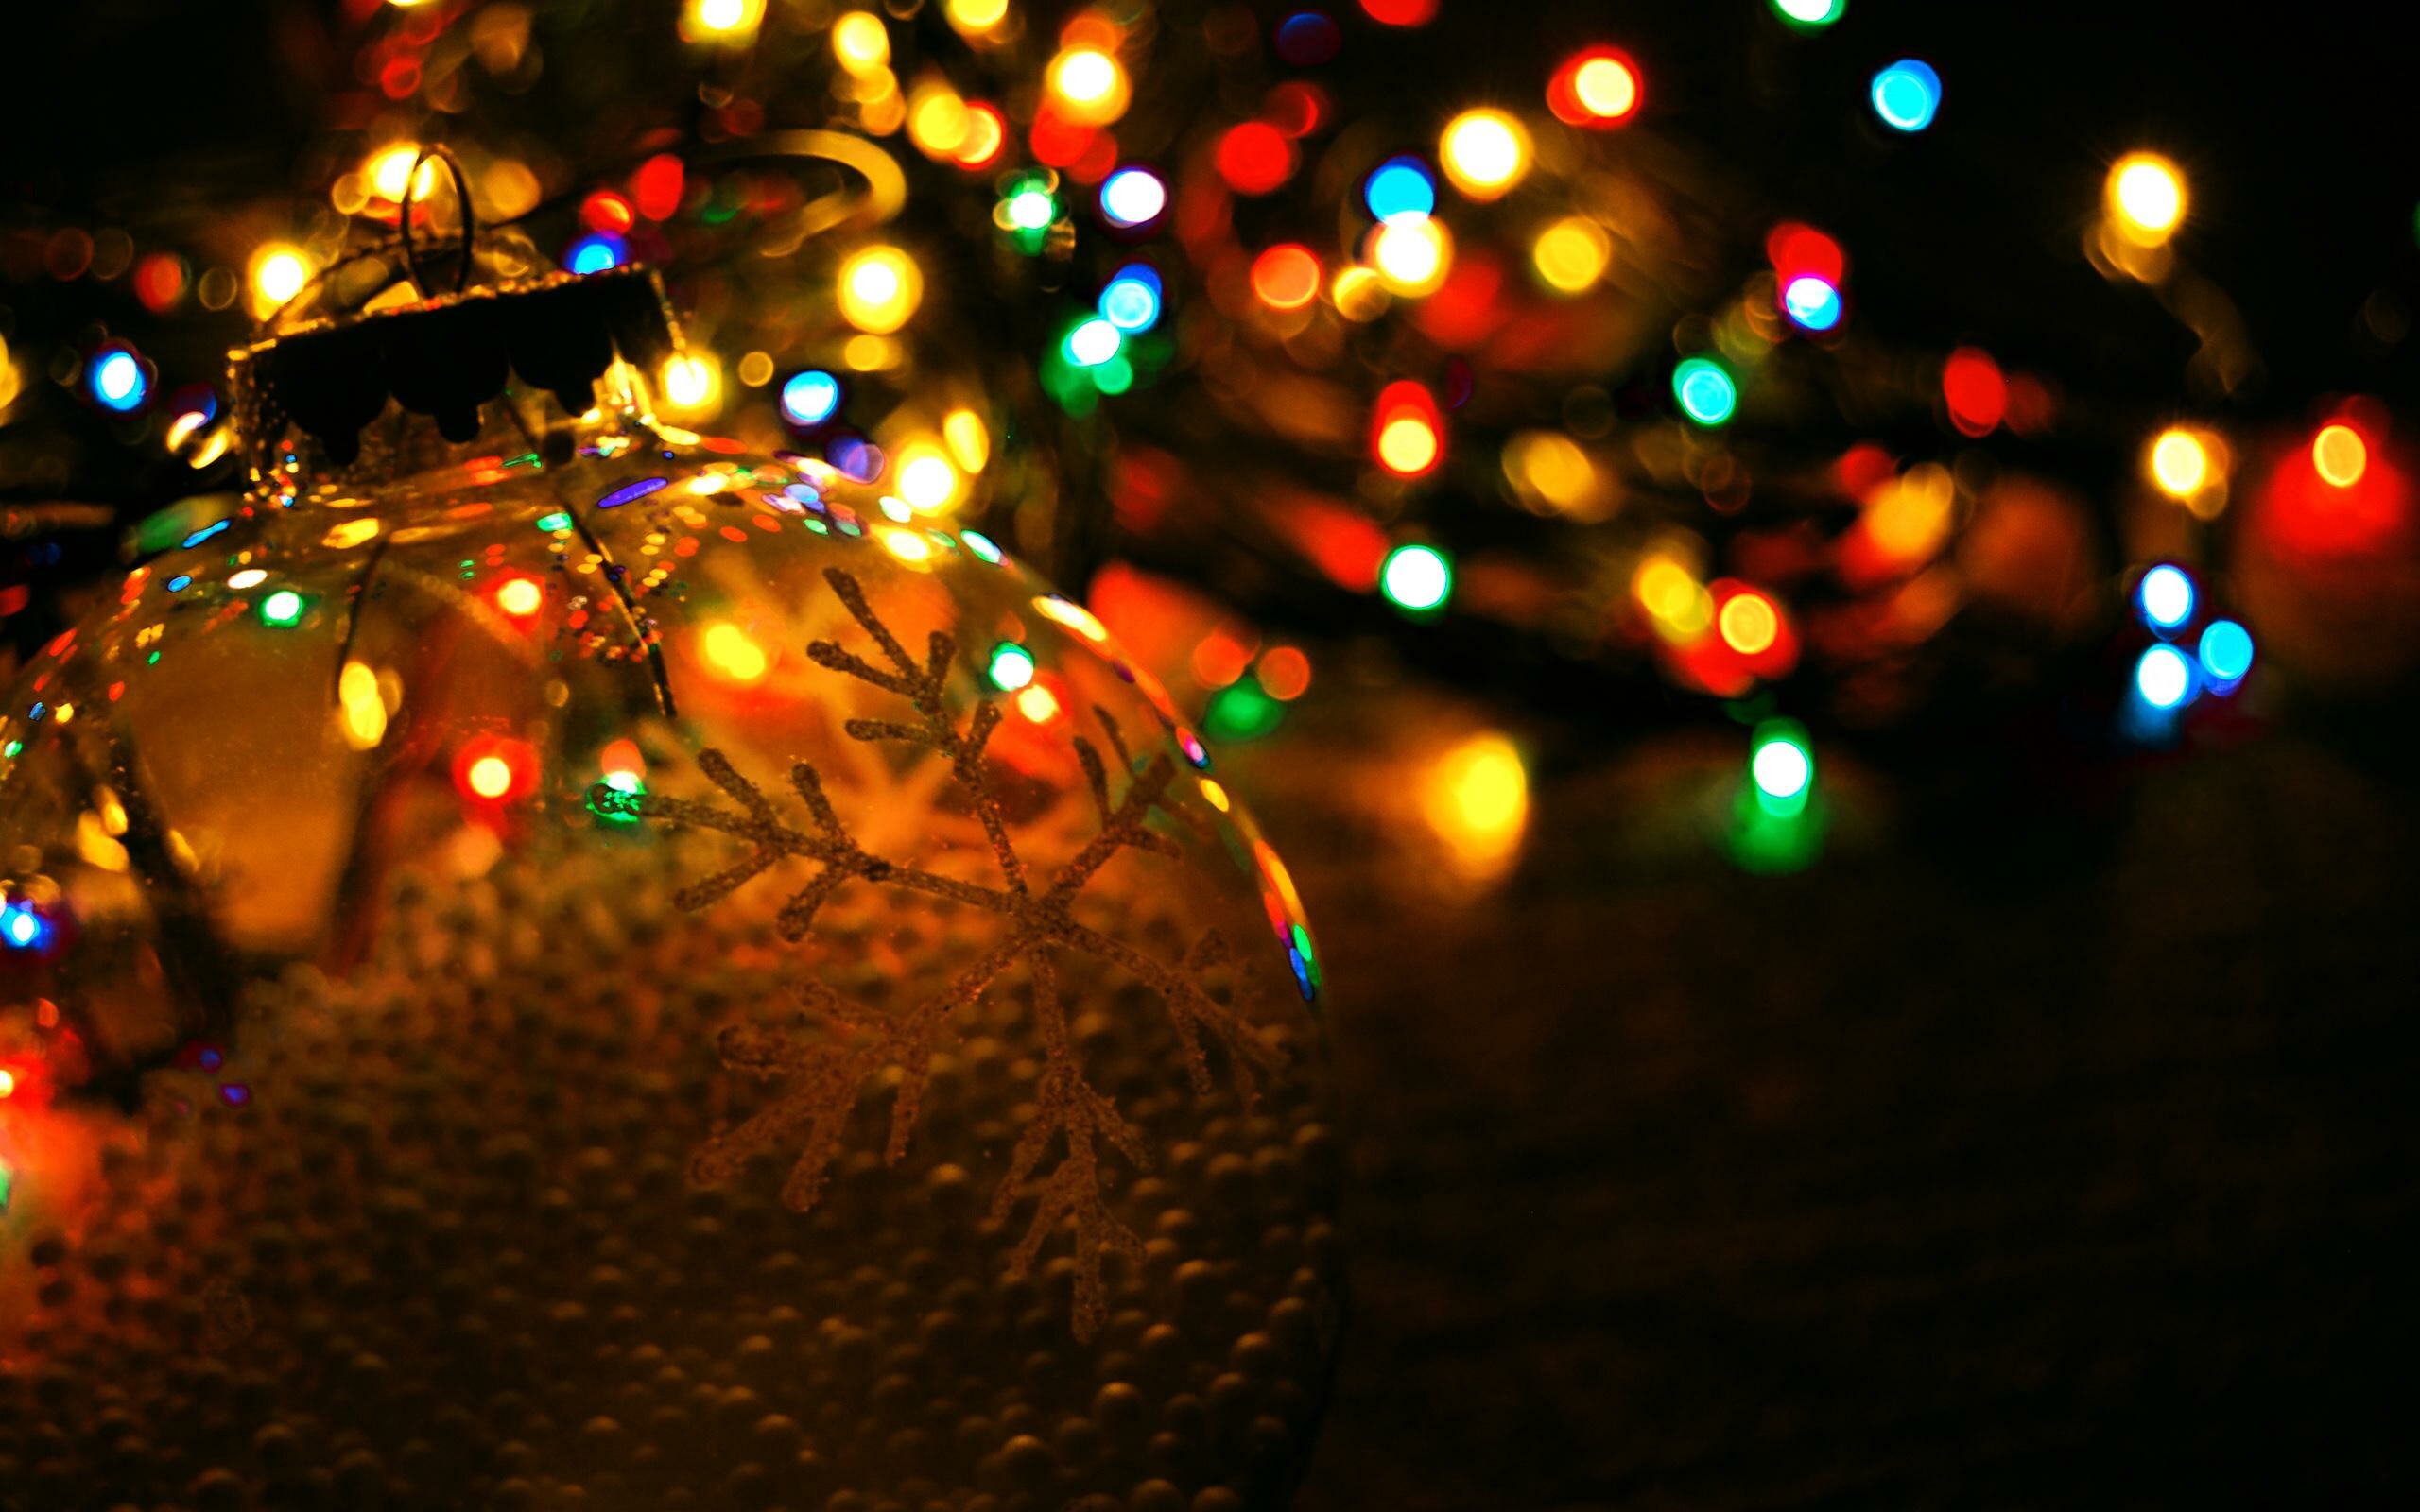 Fairy Lights: Small colored electric bulbs strung together and used for decoration. 2560x1600 HD Background.